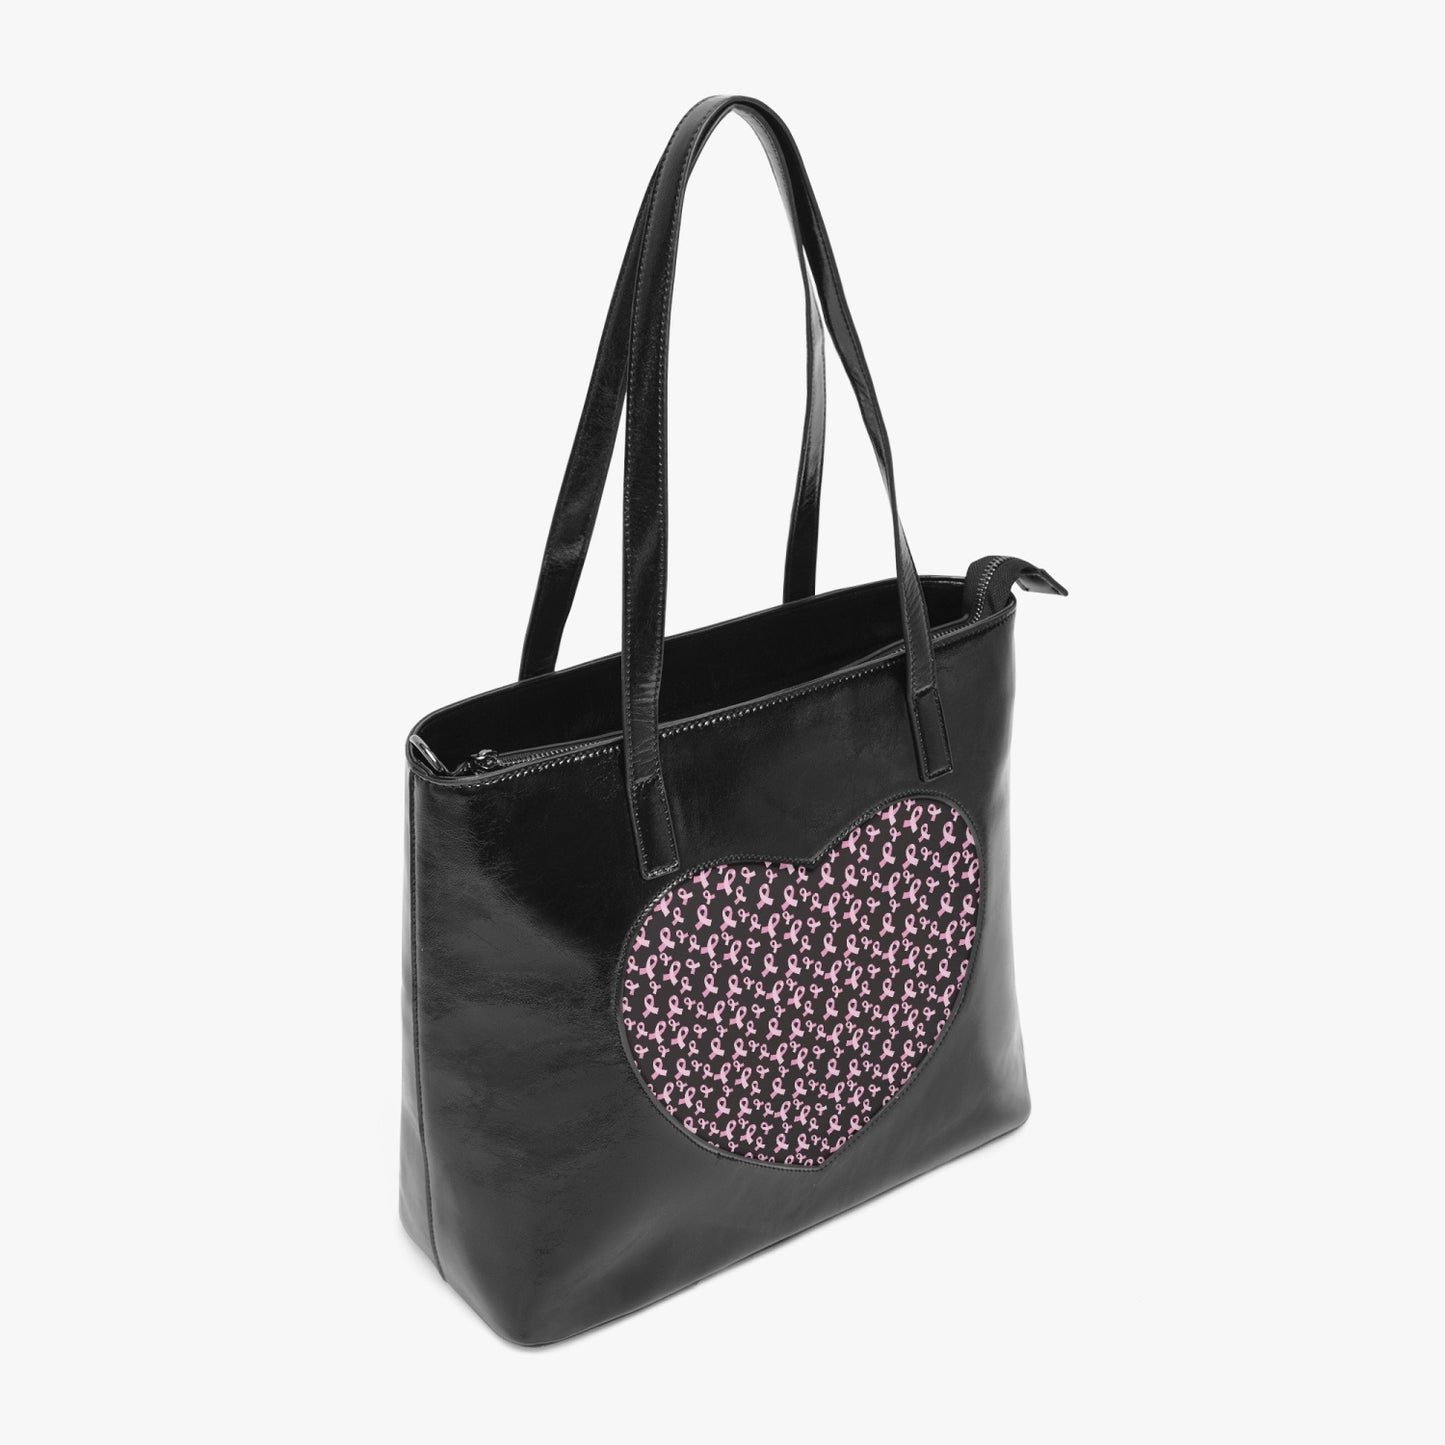 722. BREAST CANCER AWARENESS Heart Tote Bag